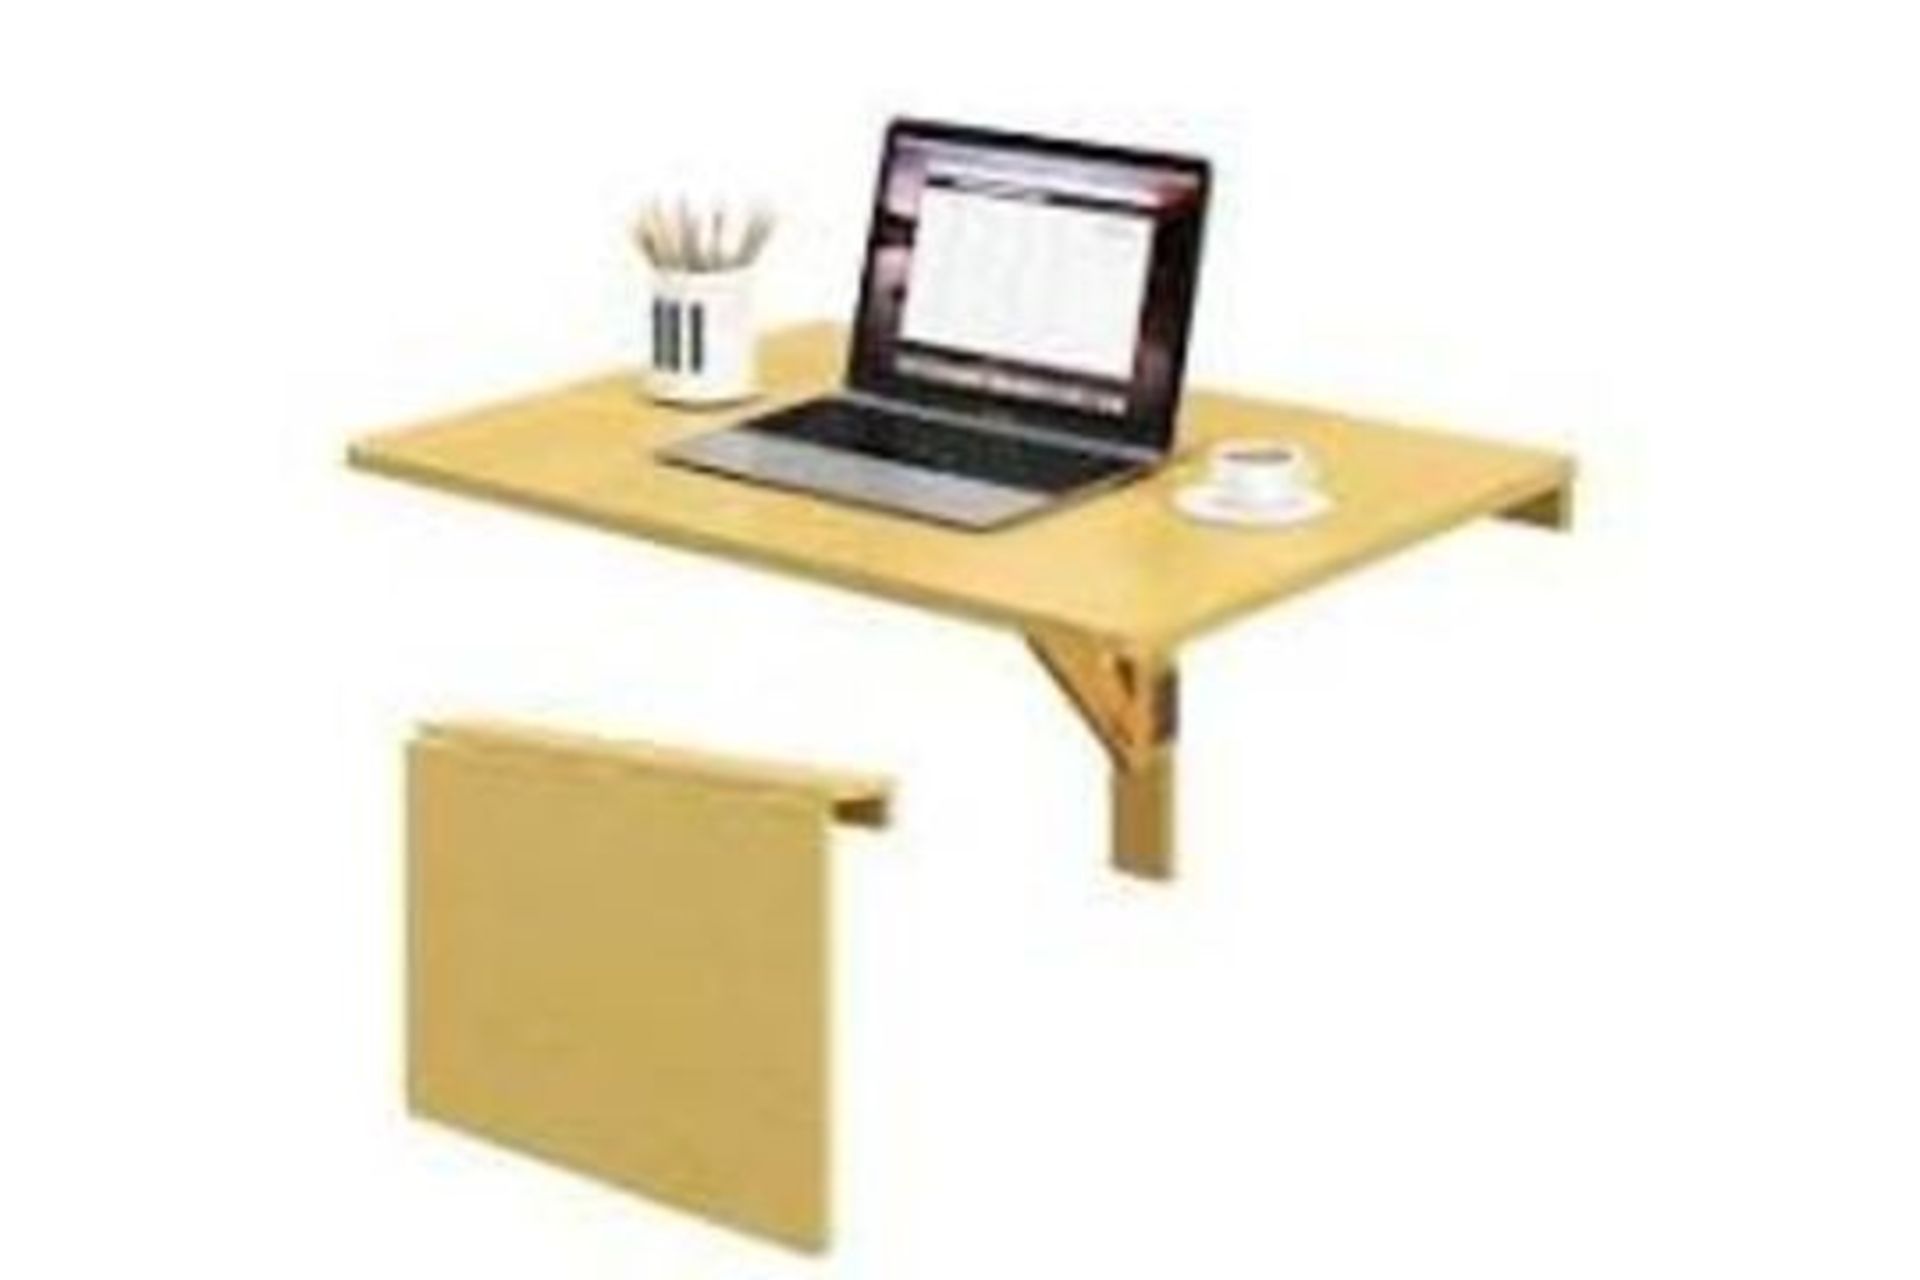 Luxury Folding Wall Mounted Drop-Leaf Table, Space Saving Floating Computer Desk with Adjustable